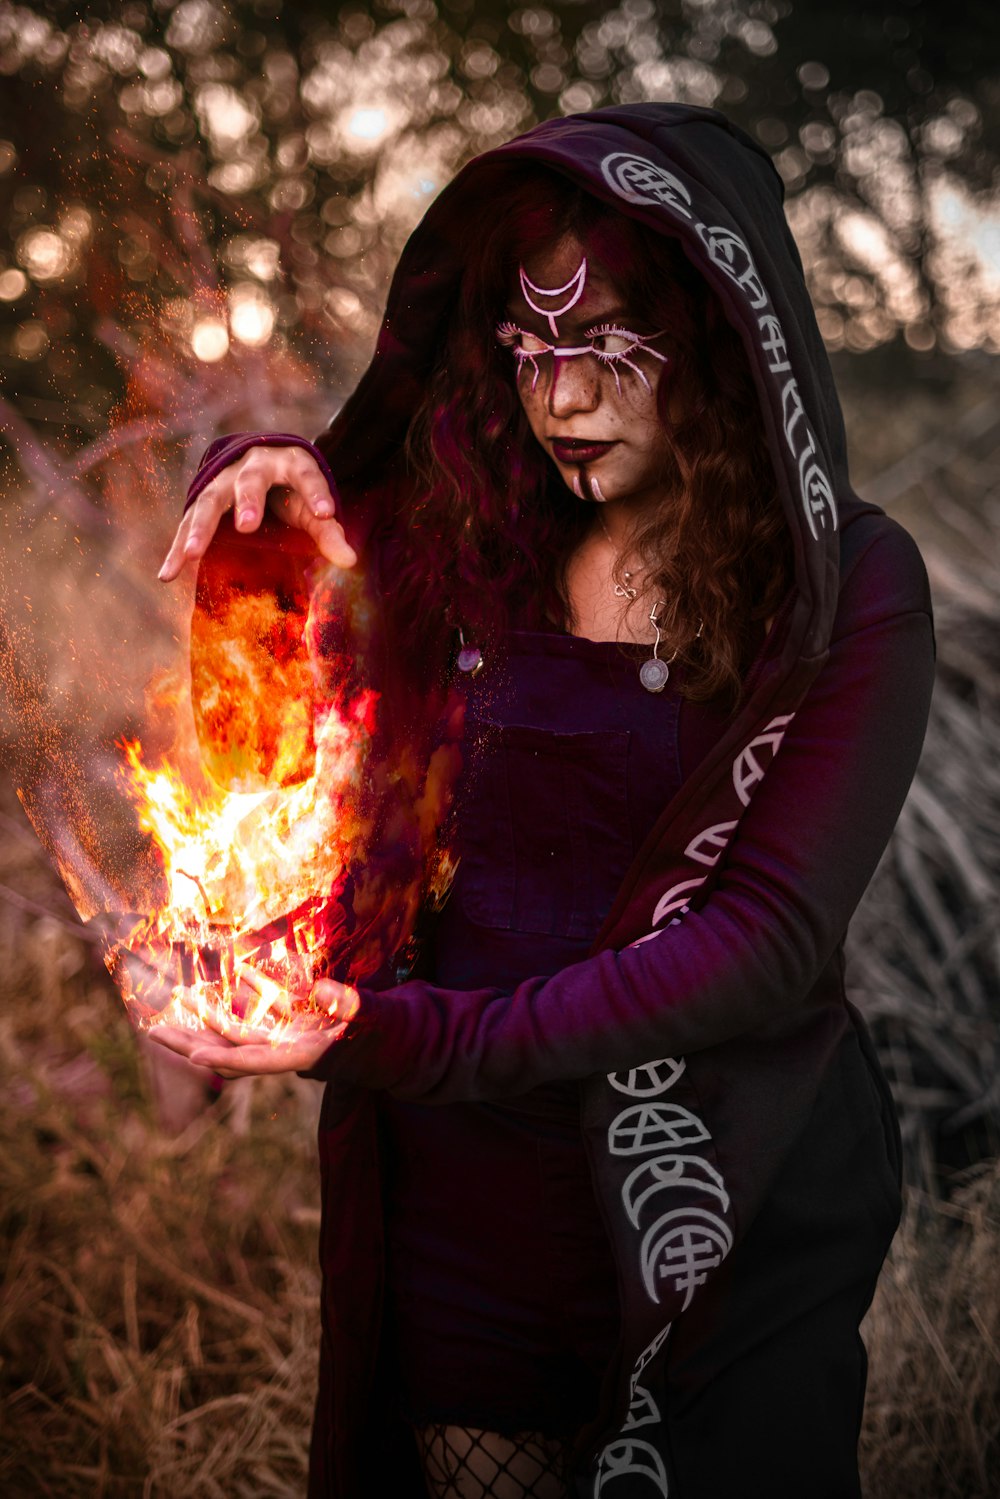 a woman in a costume holding a fire ball